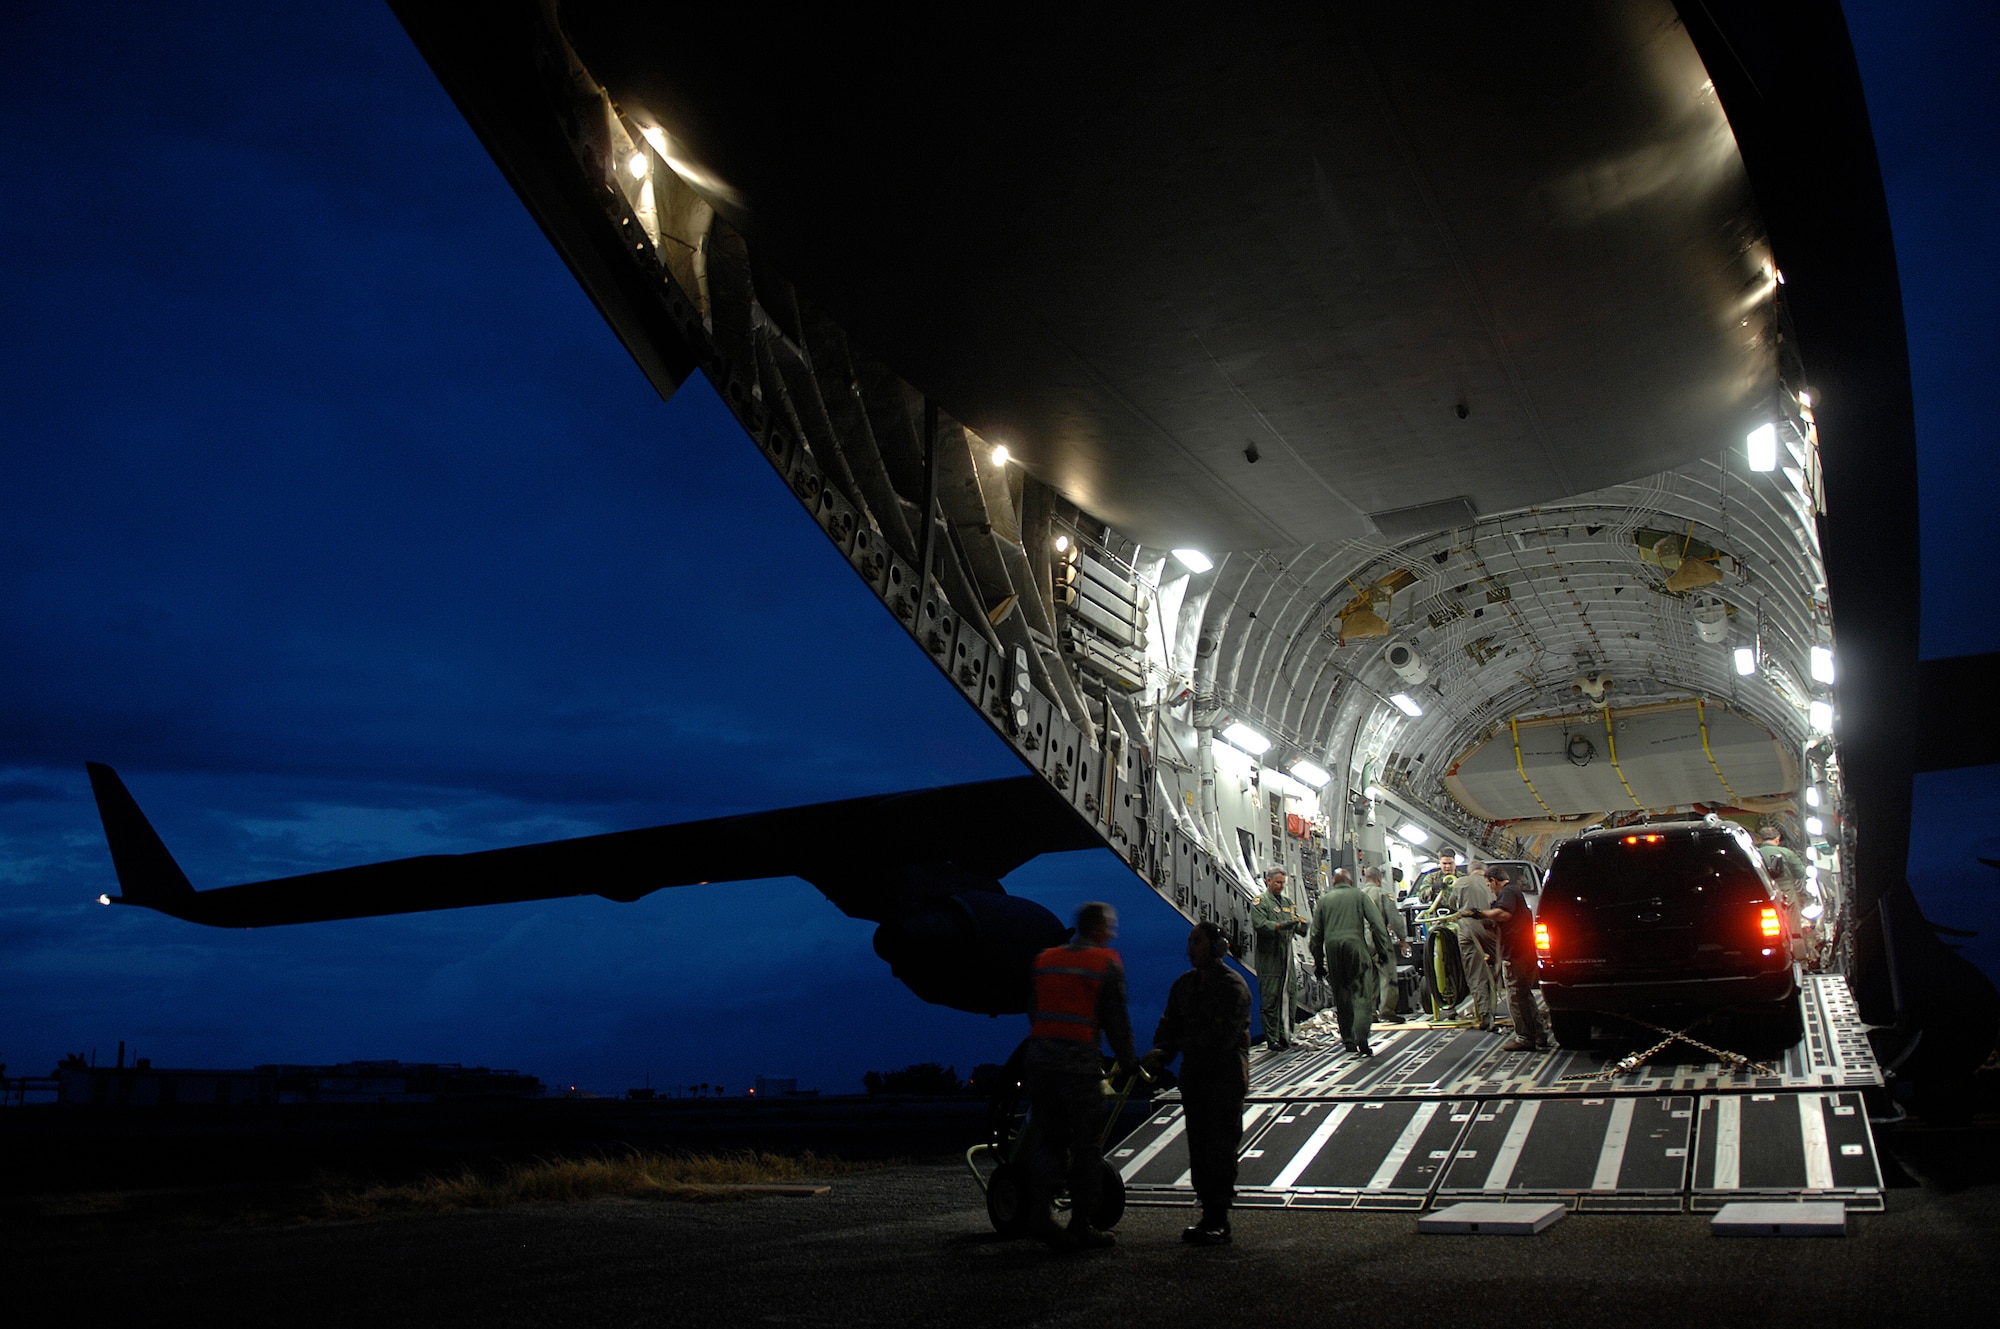 An aircrew from Air Force Reserve Command’s 729th Airlift Squadron, March Air Reserve Base, Calif., prepares to off-load an FBI rapid deployment team and vehicles from a C-17A Globemaster III aircraft on April 29, 2009, at Ramey airfield, Puerto Rico. FBI agents took part in Patriot Hoover 2009, a large-scale air mobility exercise involving AFRC and the Puerto Rico Air National Guard units. (U.S. Air Force photo/Master Sgt Rick Sforza)